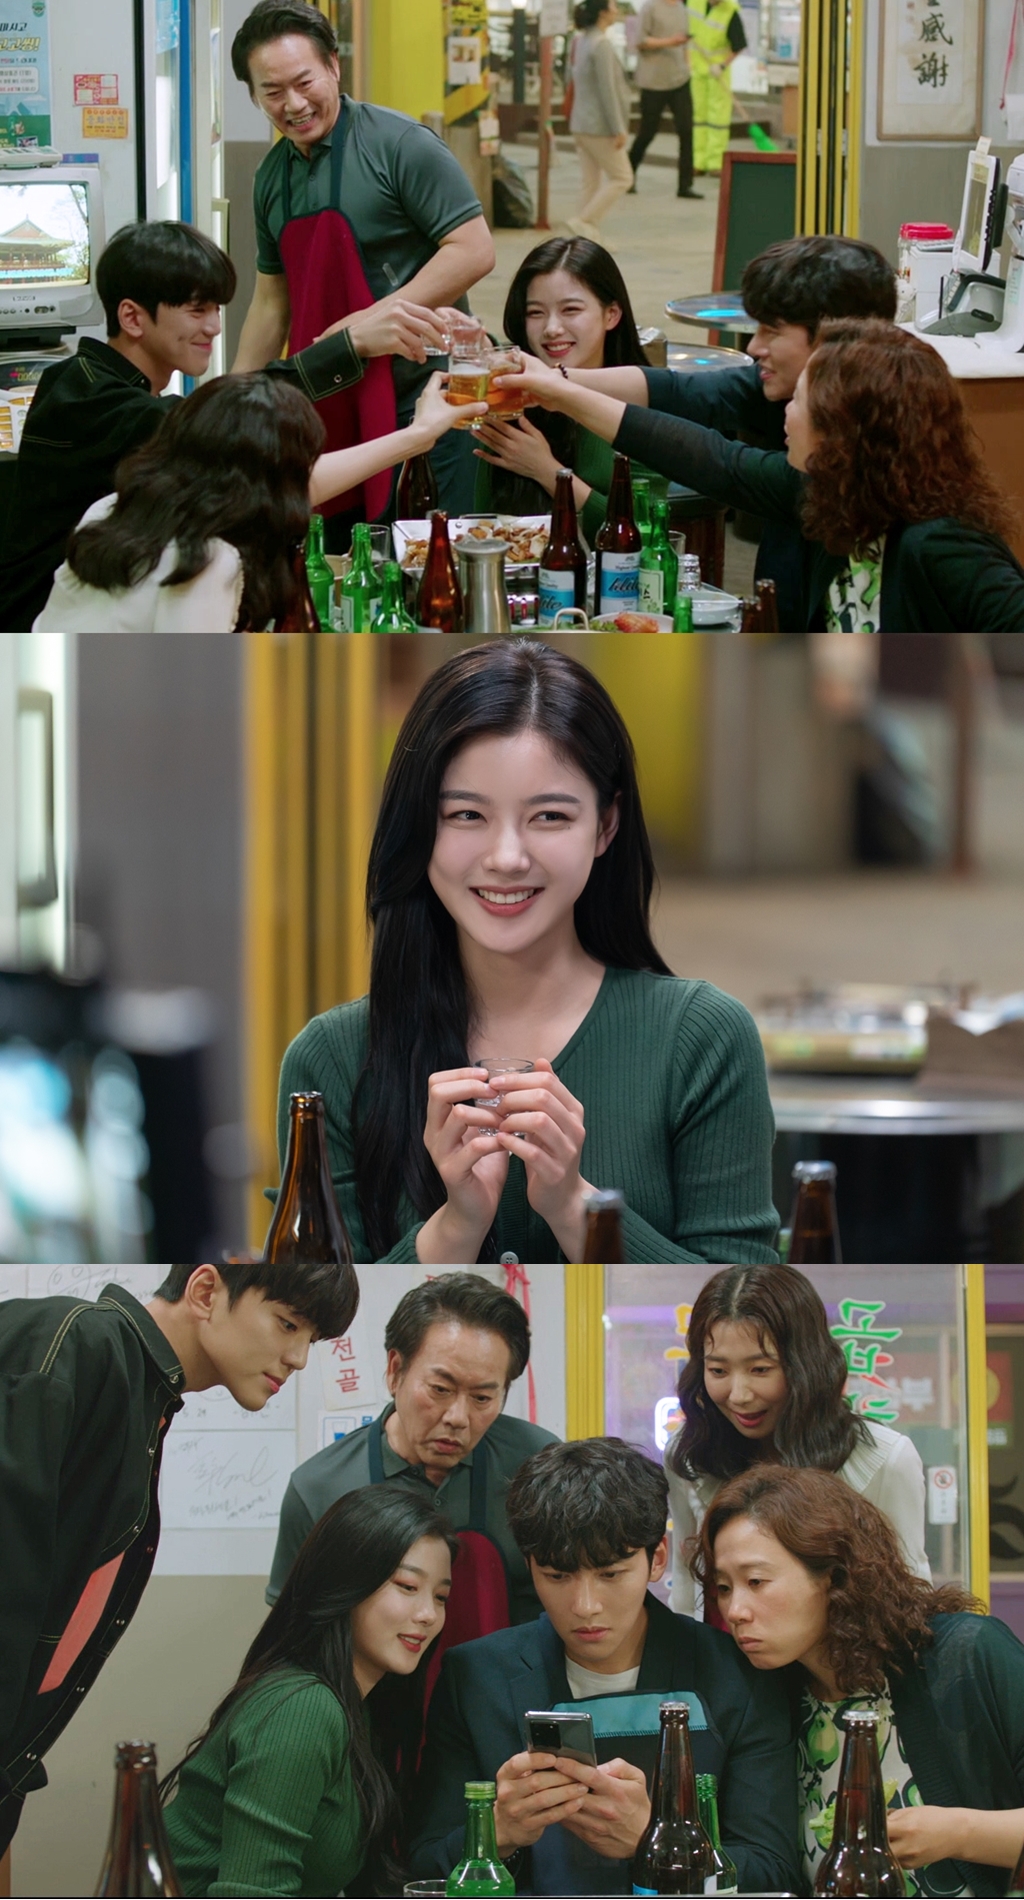 Convenience store morning star Ji Chang-wook Kim Yoo-jungs Convenience store first Alcoholic drink scene was captured.SBS gilt drama Convenience store morning star (playplay by Son Geun-joo, director Lee Myung-woo, production Taewon Entertainment) is capturing viewers by creating a pleasant atmosphere of drama in the background of the life-friendly space Convenience store.The Convenience store Jongno Shinseongdong is the same place as Choi Dae-heon (Ji Chang-wook) and the familys rice line, and there are stories that take place with the introduction of Kim Yoo-jung.In the last four times, Jeong Sae-byeol has tripled Convenience store sales and was selected as the Excellent Temple of the Month.Choi Dae-heon and his family, who heard this news, liked to dance with Our Stars and danced, and this added warmth to the house theater.On the first day, the production team of Convenience store morning star unveiled the Alcoholic drink scene where all Convenience store family members such as Choi Dae-heon and Jeongsae star gathered.It is a place to celebrate the star of the star, and it is also the first Alcoholic drink after the star of the star comes into the alba.In the open photo, the star is smiling with shame as he is congratulated by the Choi Dae-heon family.In a noisy and pleasant atmosphere, the star seems to naturally permeate the family of Choi Dae-heon.The alcoholic drink scene, which is full of joy and joy like a family feast, makes you smile.But this atmosphere will soon be broken.Choi Dae-heon, who is contacted somewhere and checks his cell phone, and Alcoholic drink scene, which suddenly became a little cold, amplifies the curiosity about what happened to them.In addition, there are other people besides the Convenience store family at the Alcoholic drink scene, which attracts attention: Kang Ji-wook (Kim Min-kyu), a celebrity Nam Sa-jin of Jeong Sae-Sung.How Kang Ji-wook joined the place is also a point that attracts viewers interest.Attention is focused on what kind of suddenly (suddenly getting cheaper) situation will come to the first Alcoholic drink scene of the star where the celebration atmosphere is formed properly.